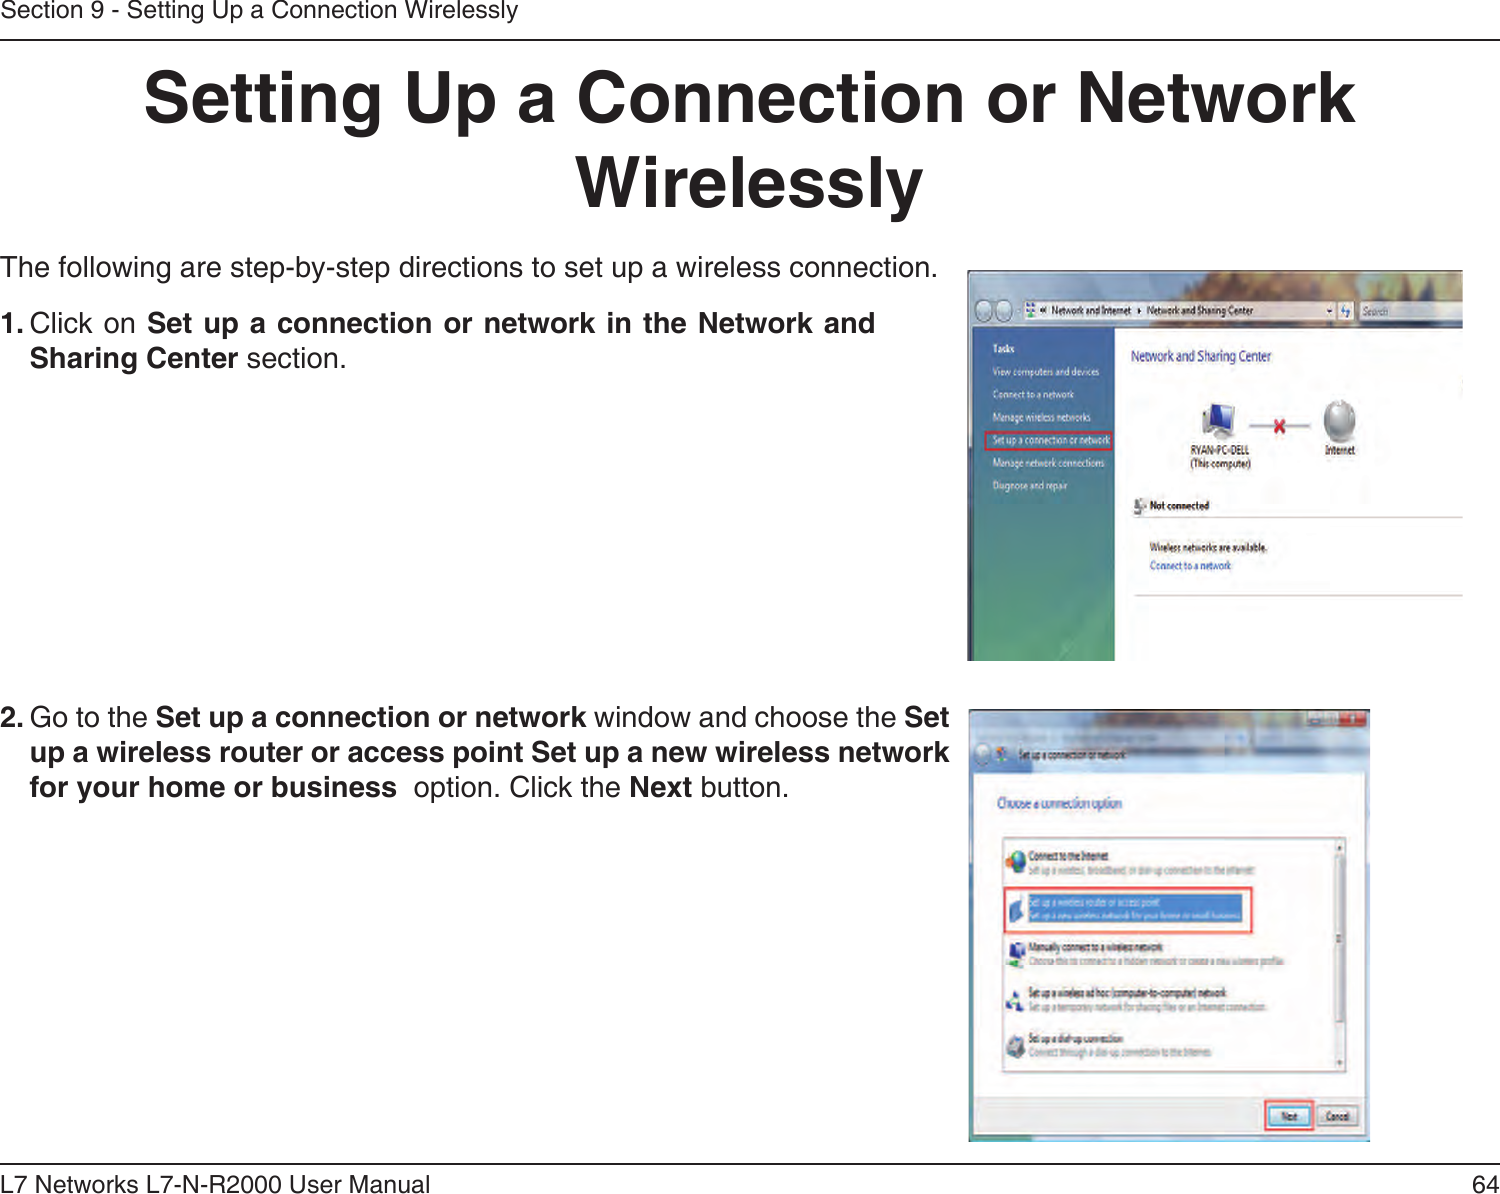 64L7 Networks L7-N-R2000 User ManualSection 9 - Setting Up a Connection WirelesslySetting Up a Connection or Network WirelesslyThe following are step-by-step directions to set up a wireless connection.2. Go to the Set up a connection or network window and choose the Set up a wireless router or access point Set up a new wireless network for your home or business  option. Click the Next button. 1. Click on Set up a connection or network in the Network and Sharing Center section. 